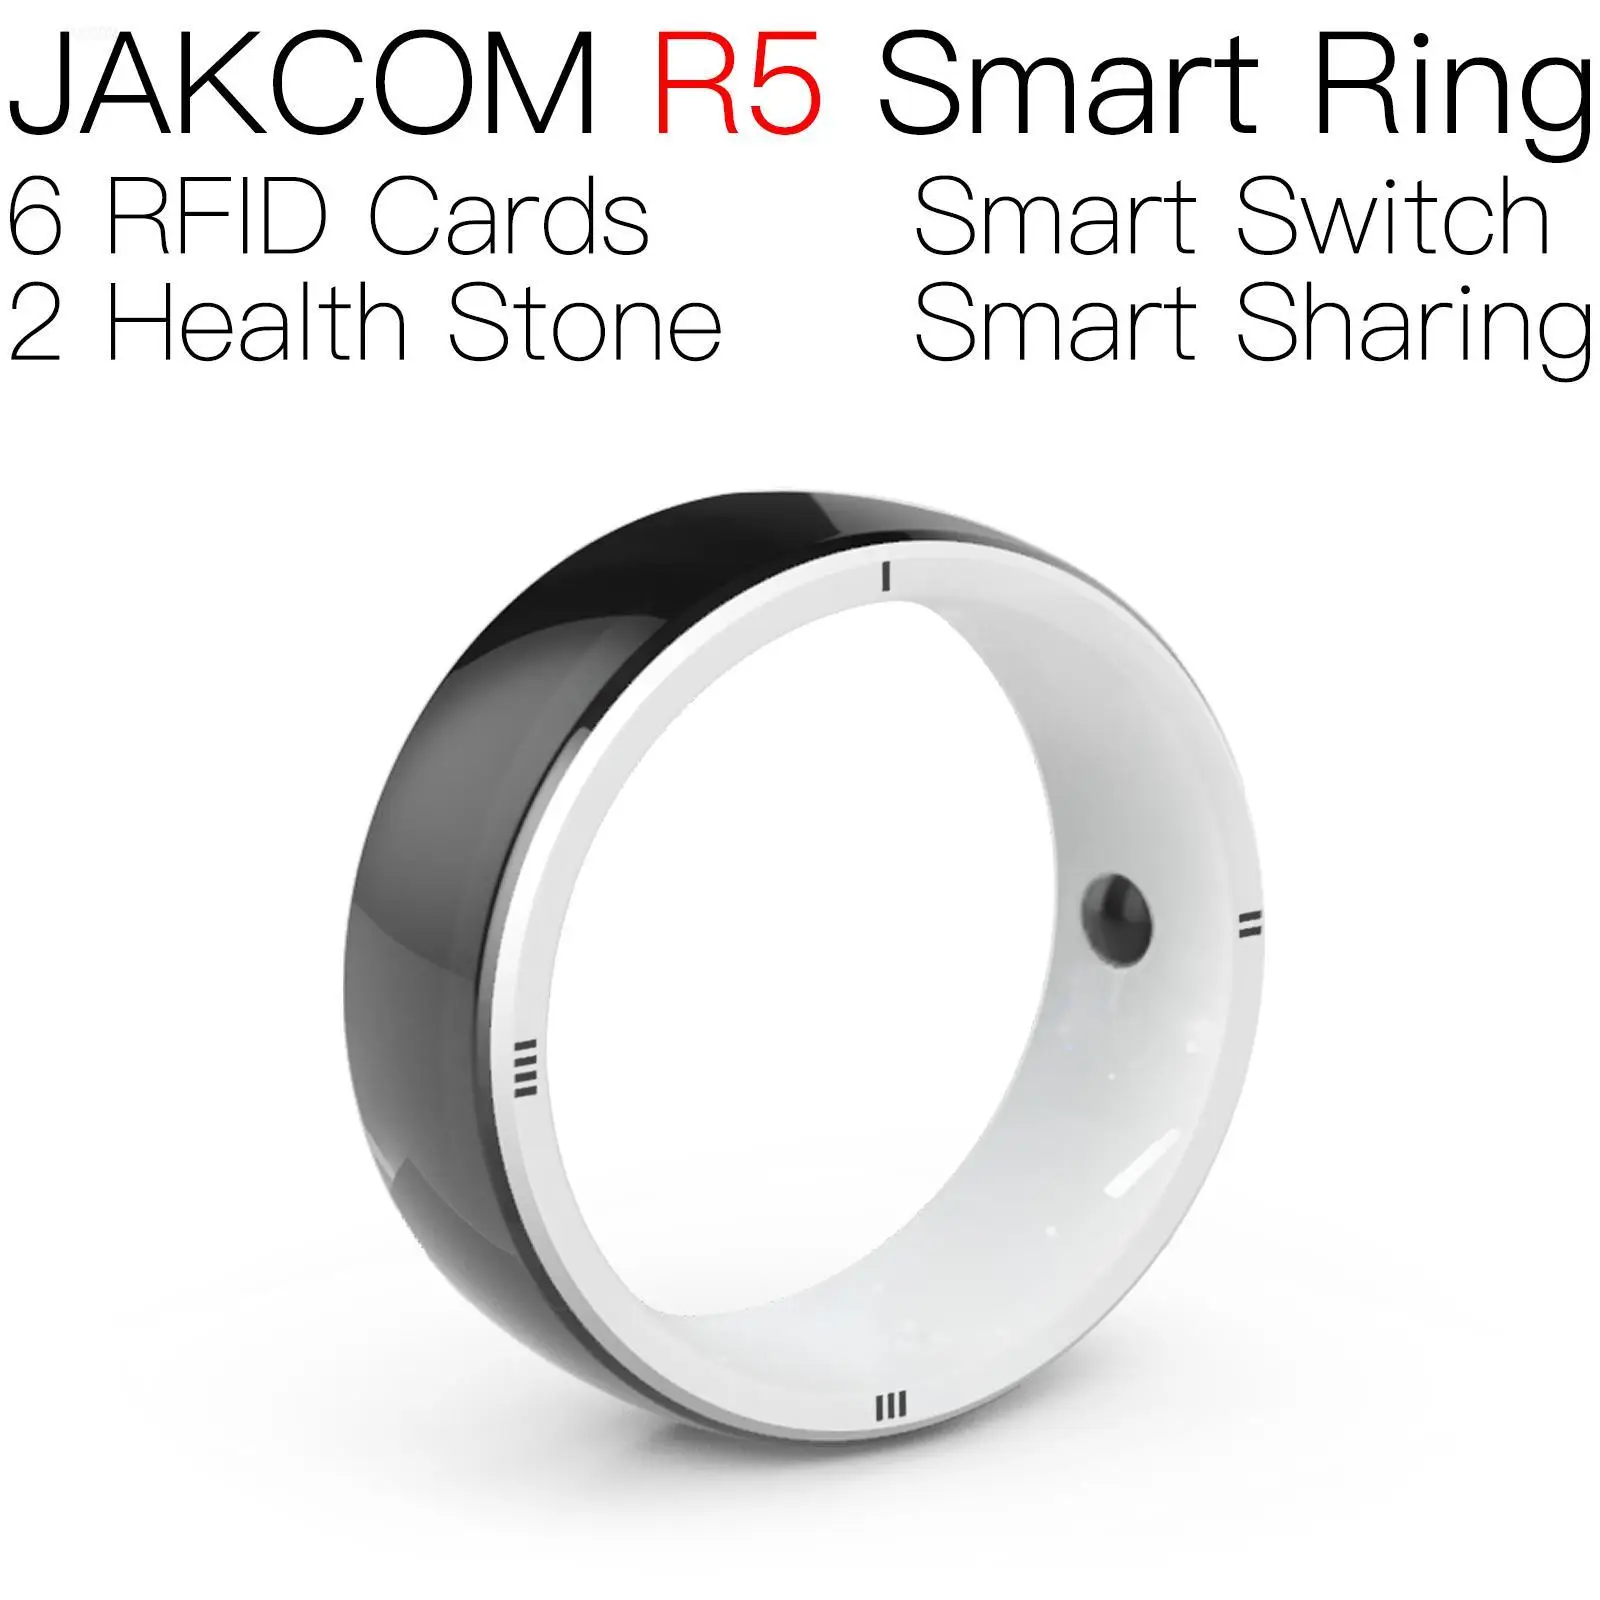 

JAKCOM R5 Smart Ring New arrival as smart nfc pay ntag215 100pcs cards e 213 mini cooper s f54 クラブマン rfid for android 125khz